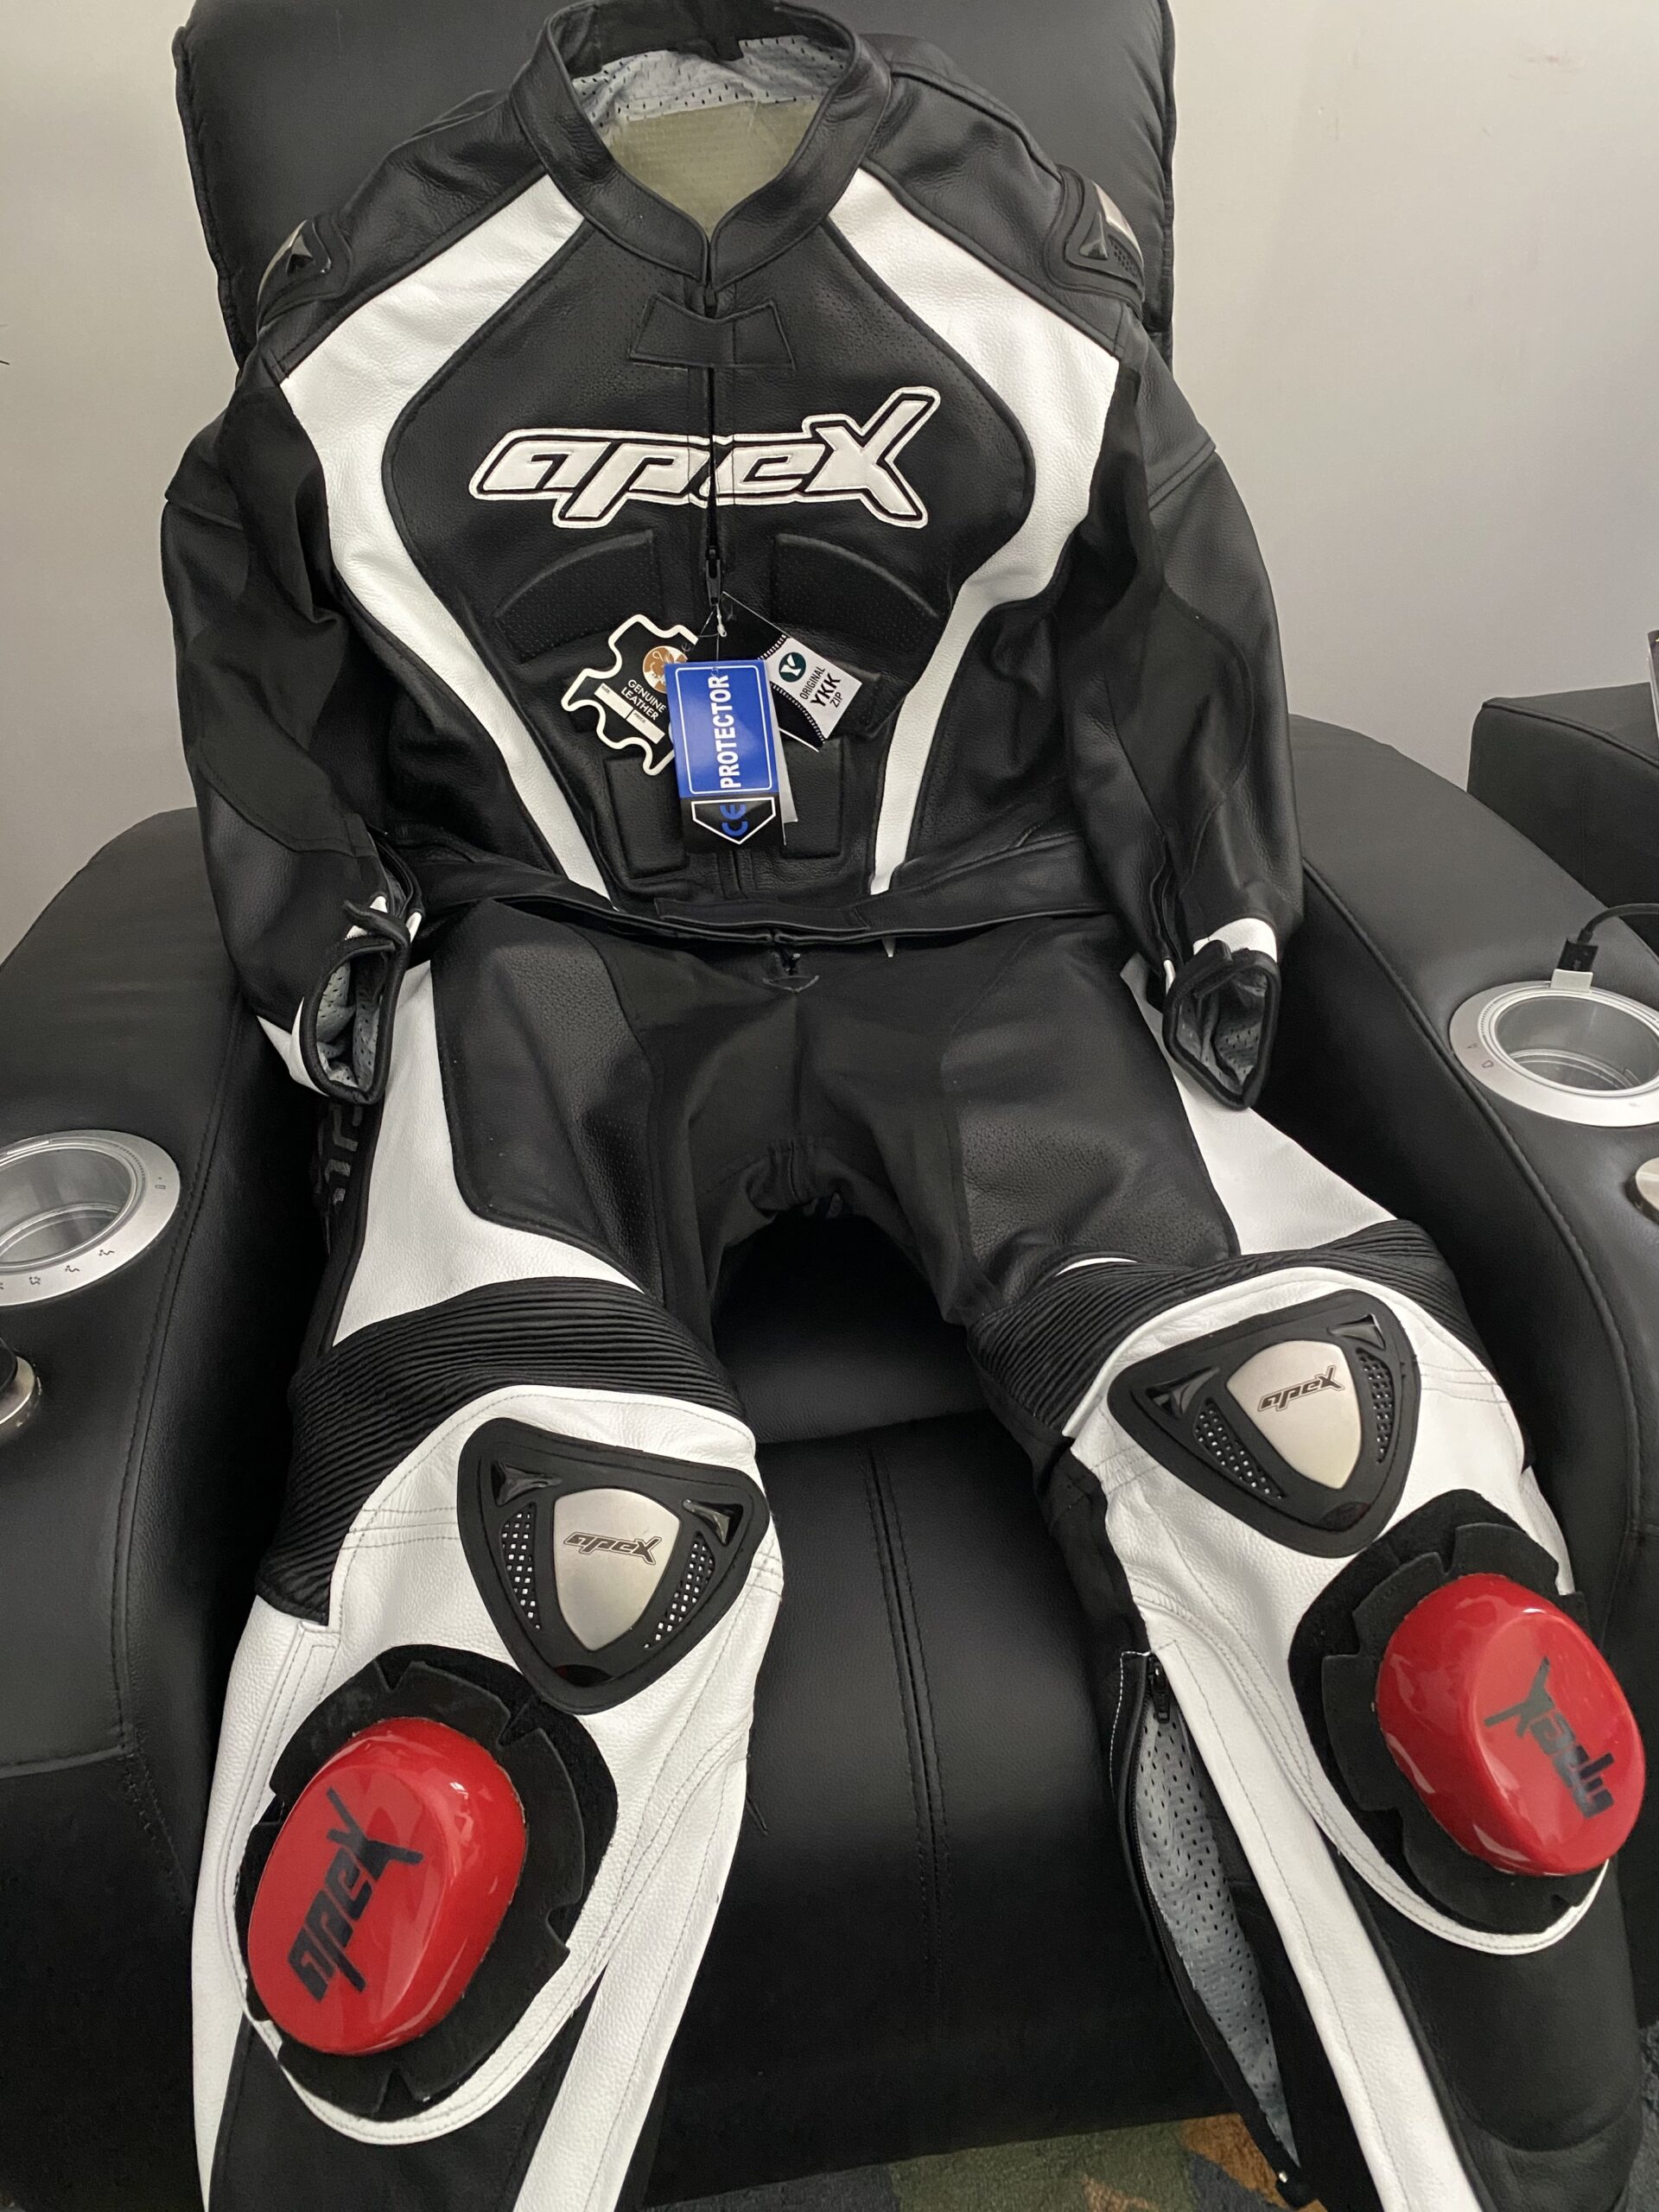 New Suit Motorcycle road and race leathers and apparel tailor made custom styles based in Brisbane Australia.